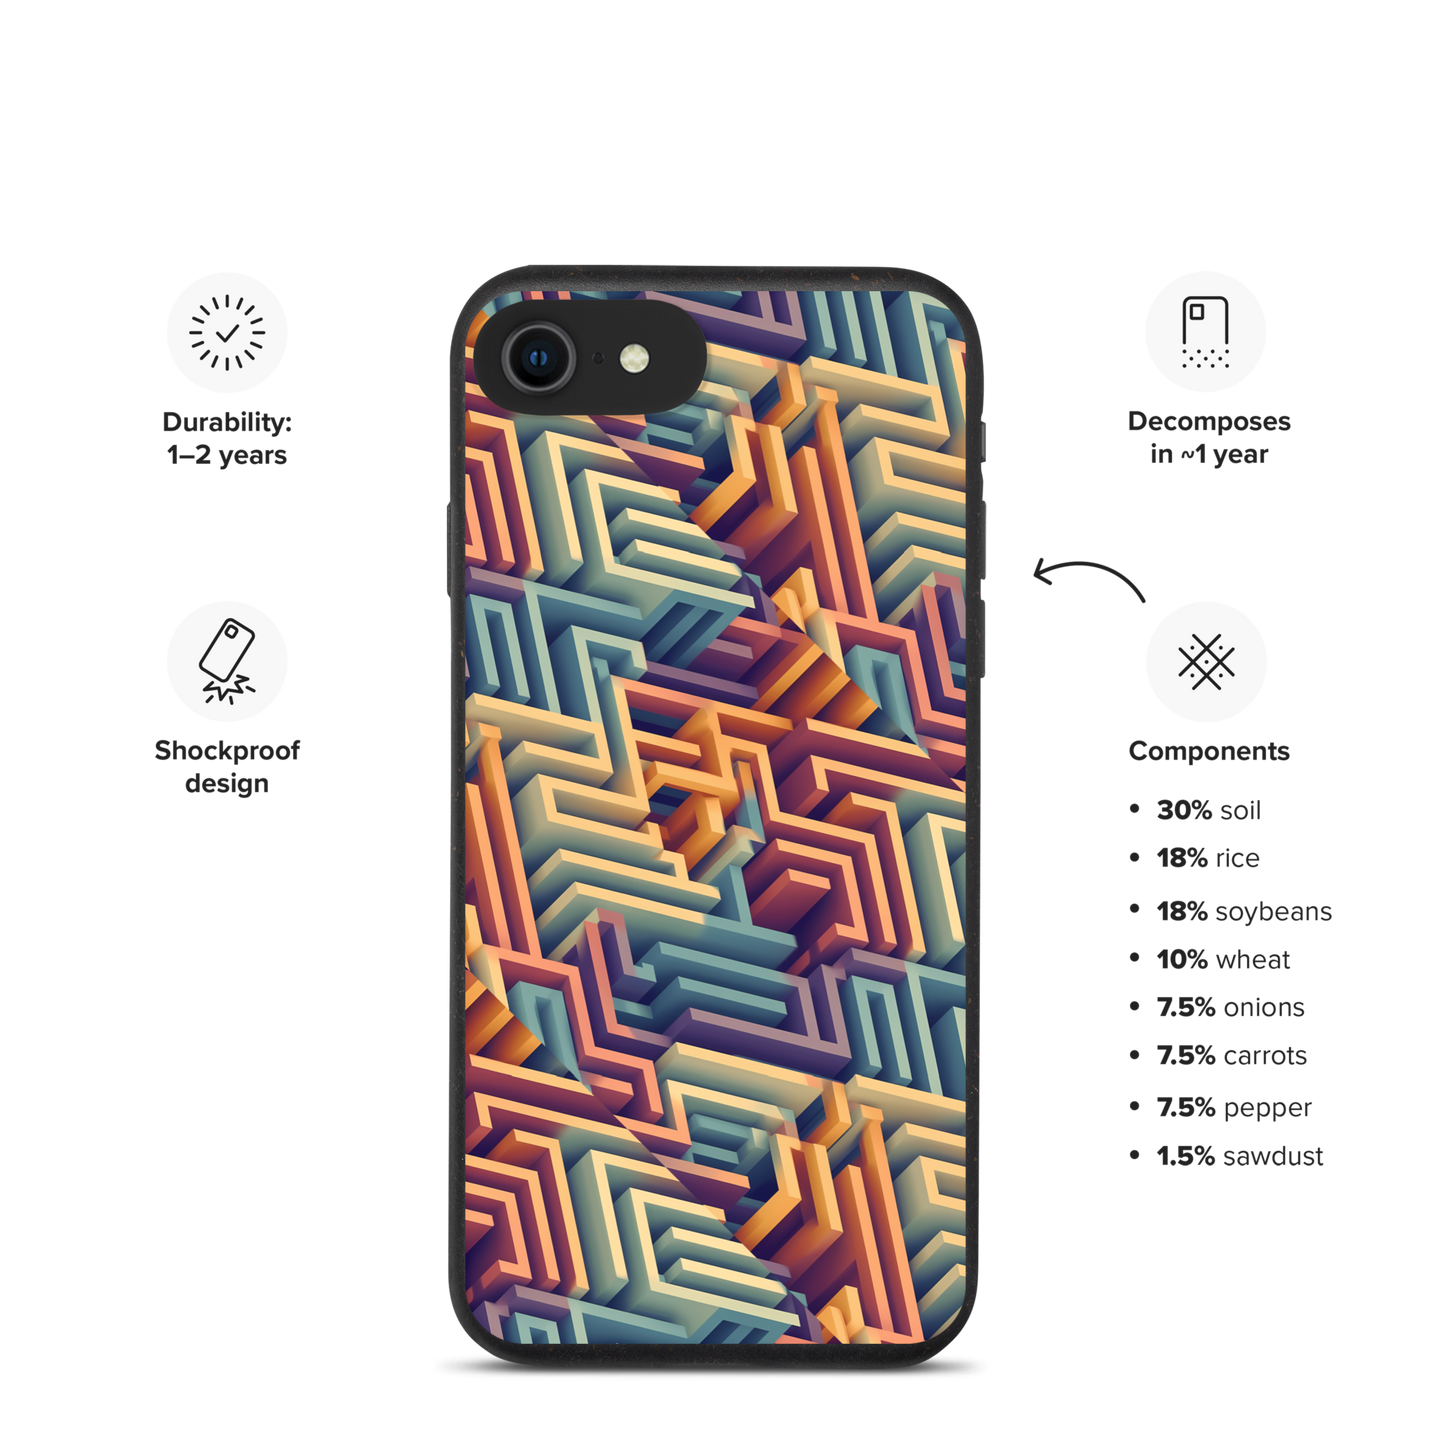 3D Maze Illusion | 3D Patterns | Speckled Case for iPhone - #3